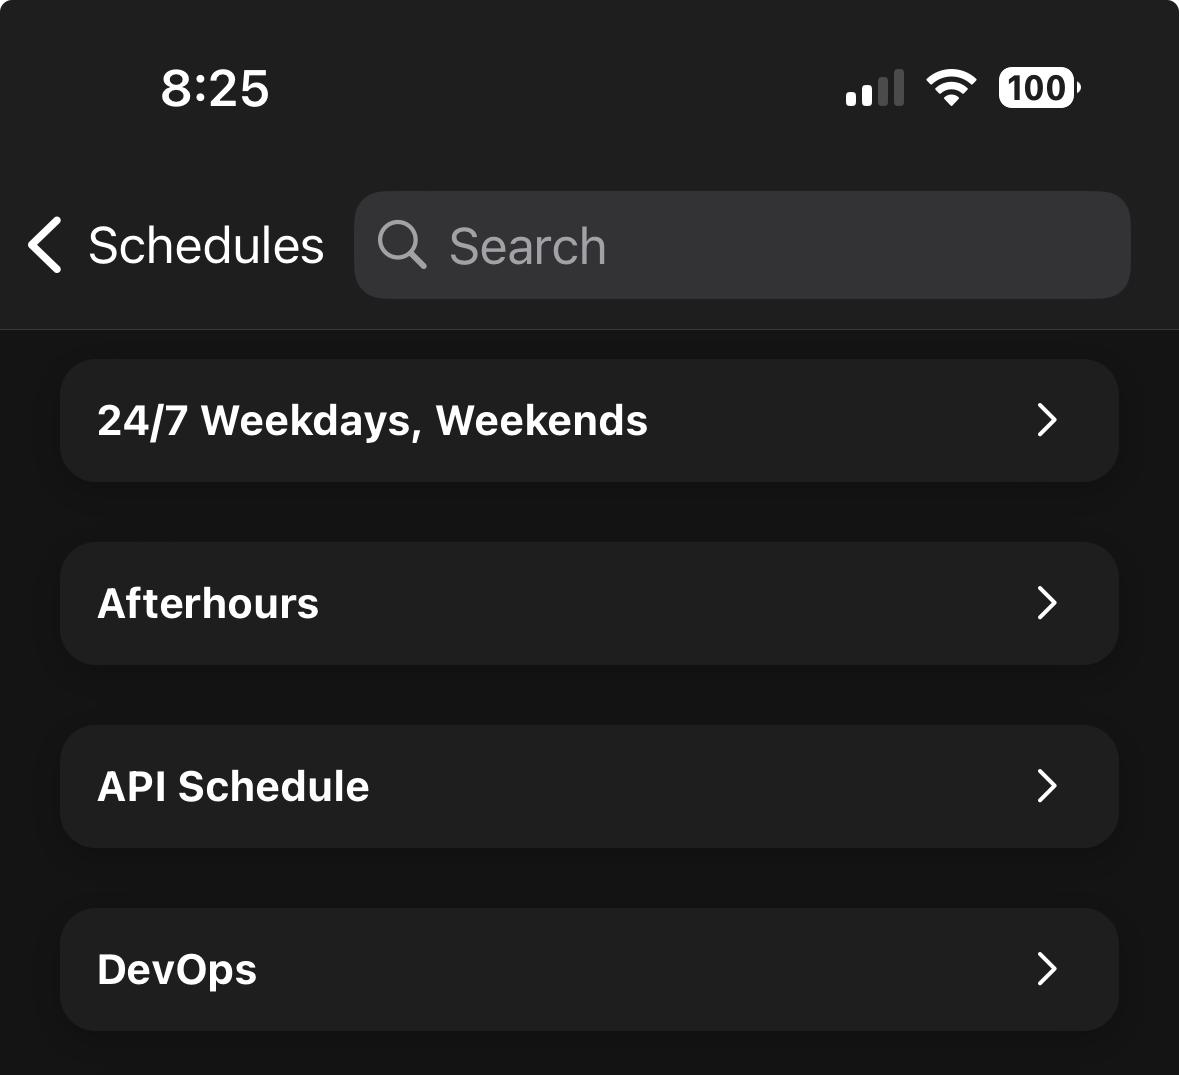 Search schedules